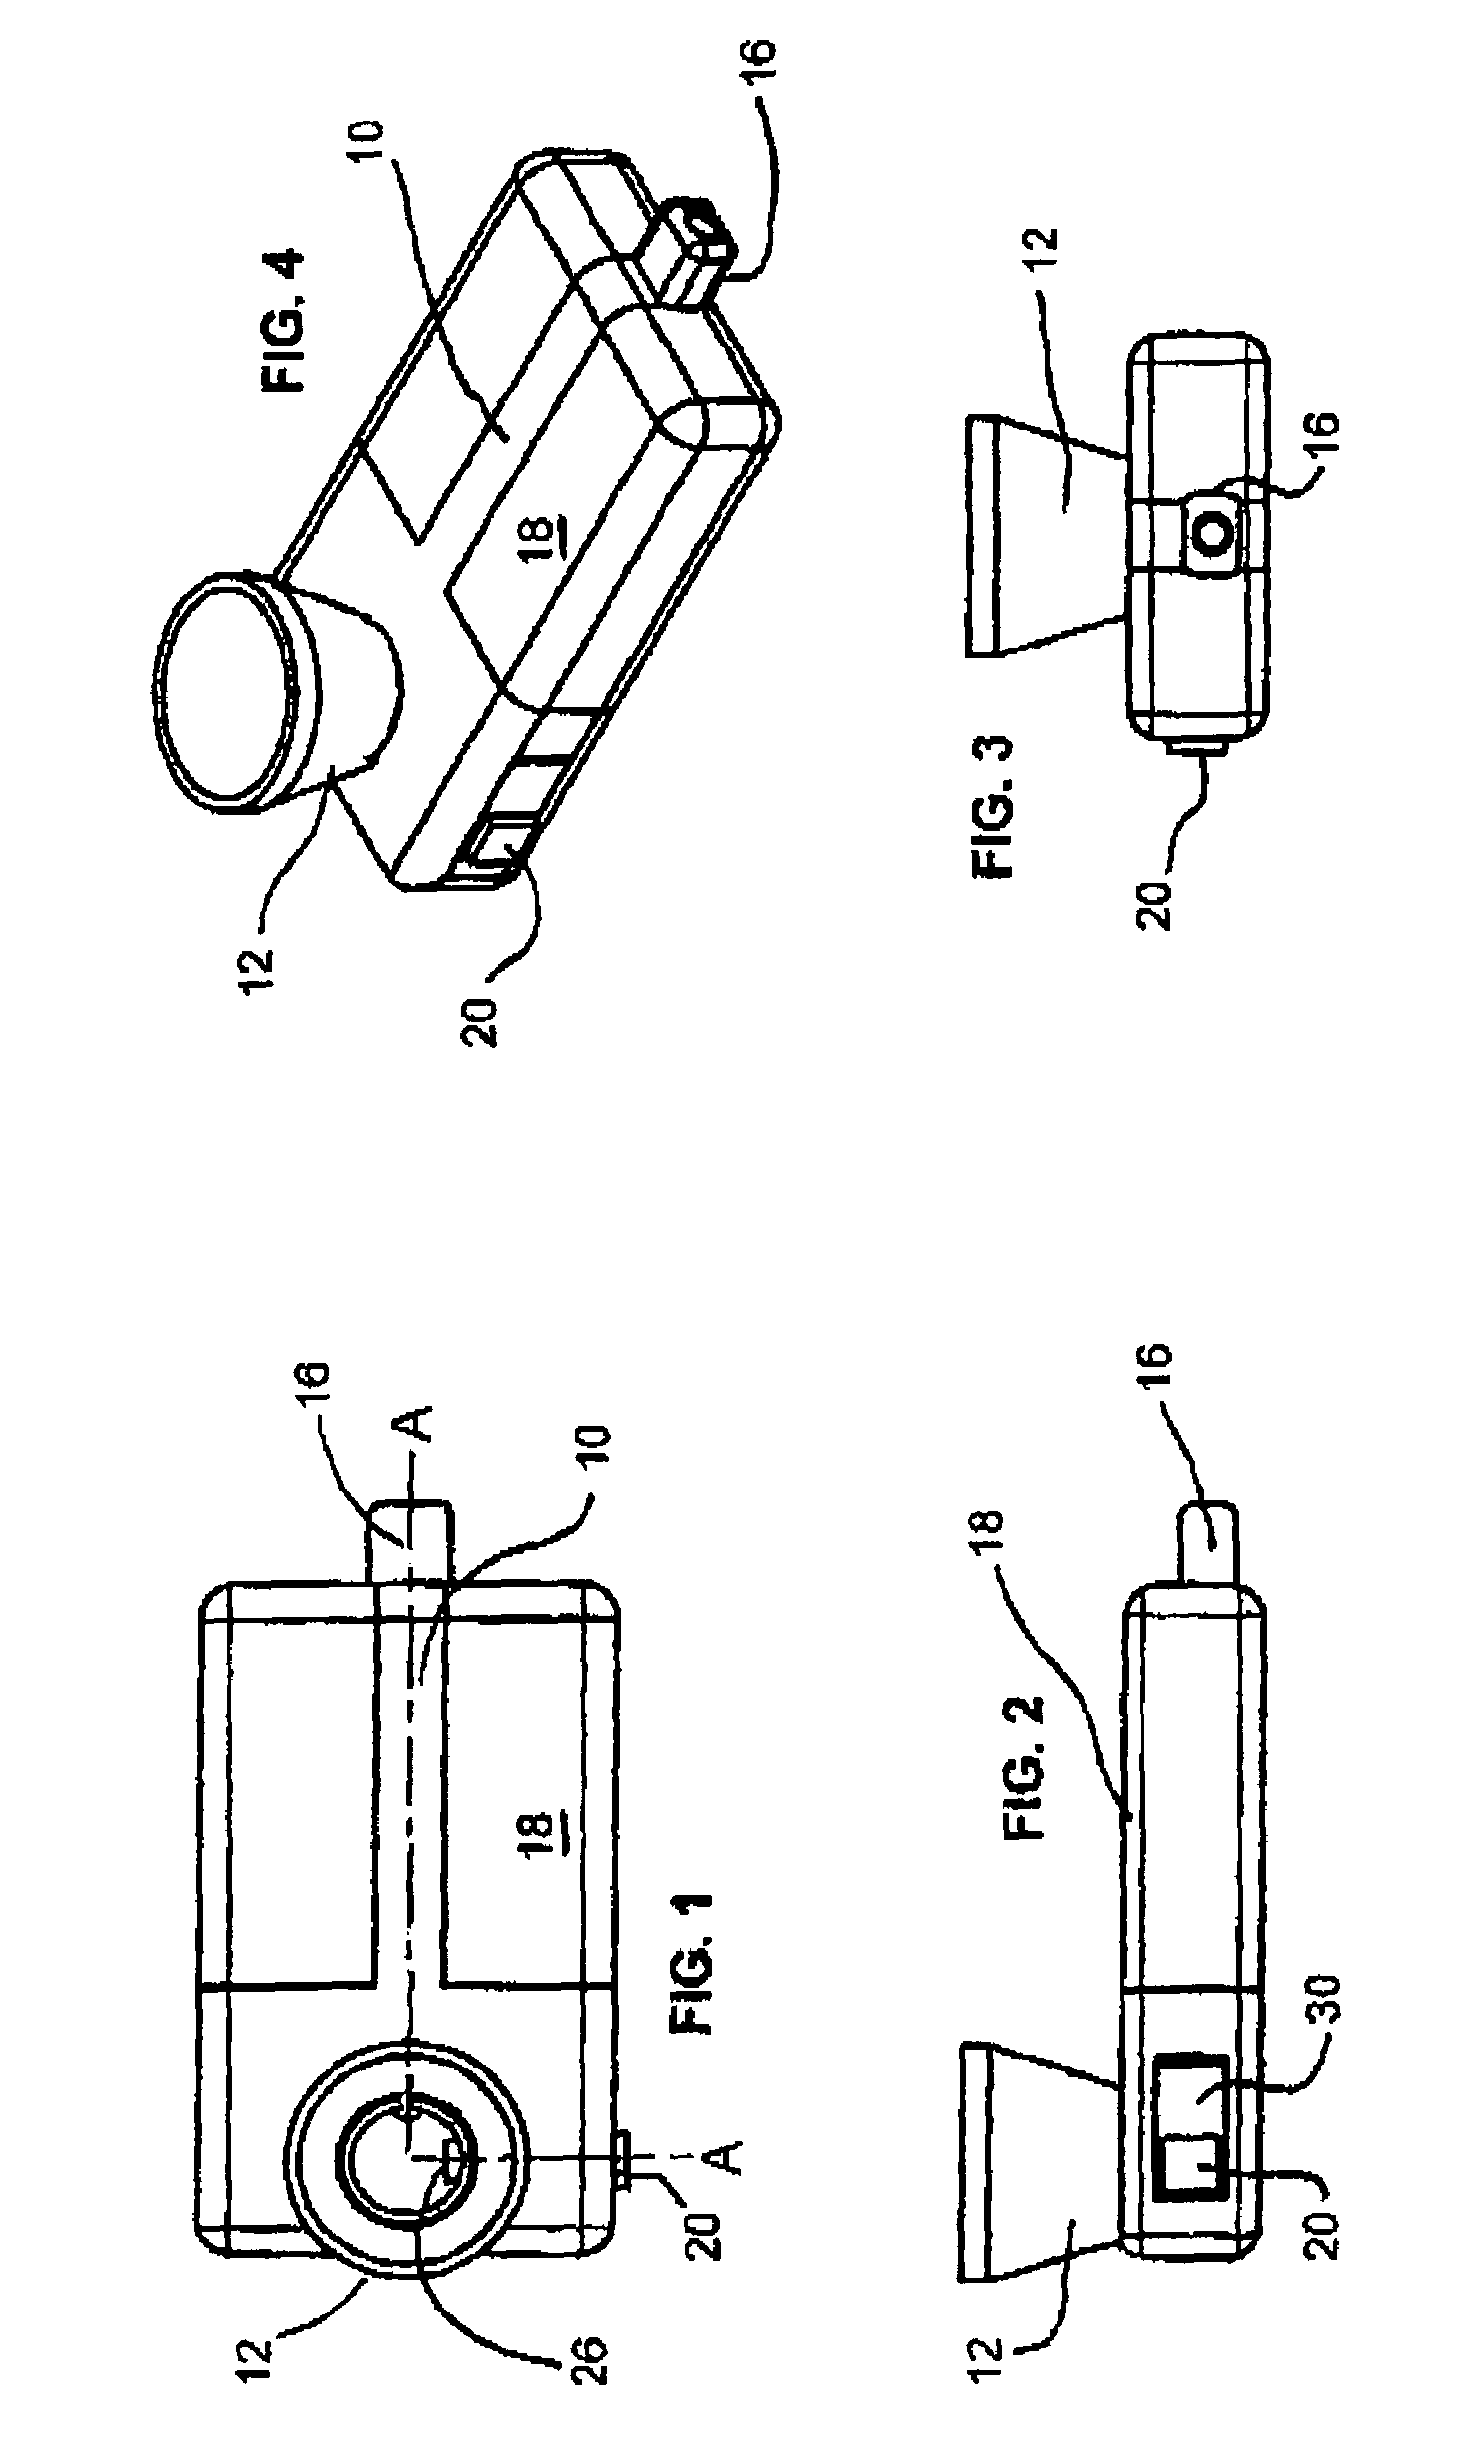 Smoking device with self-contained ignition means